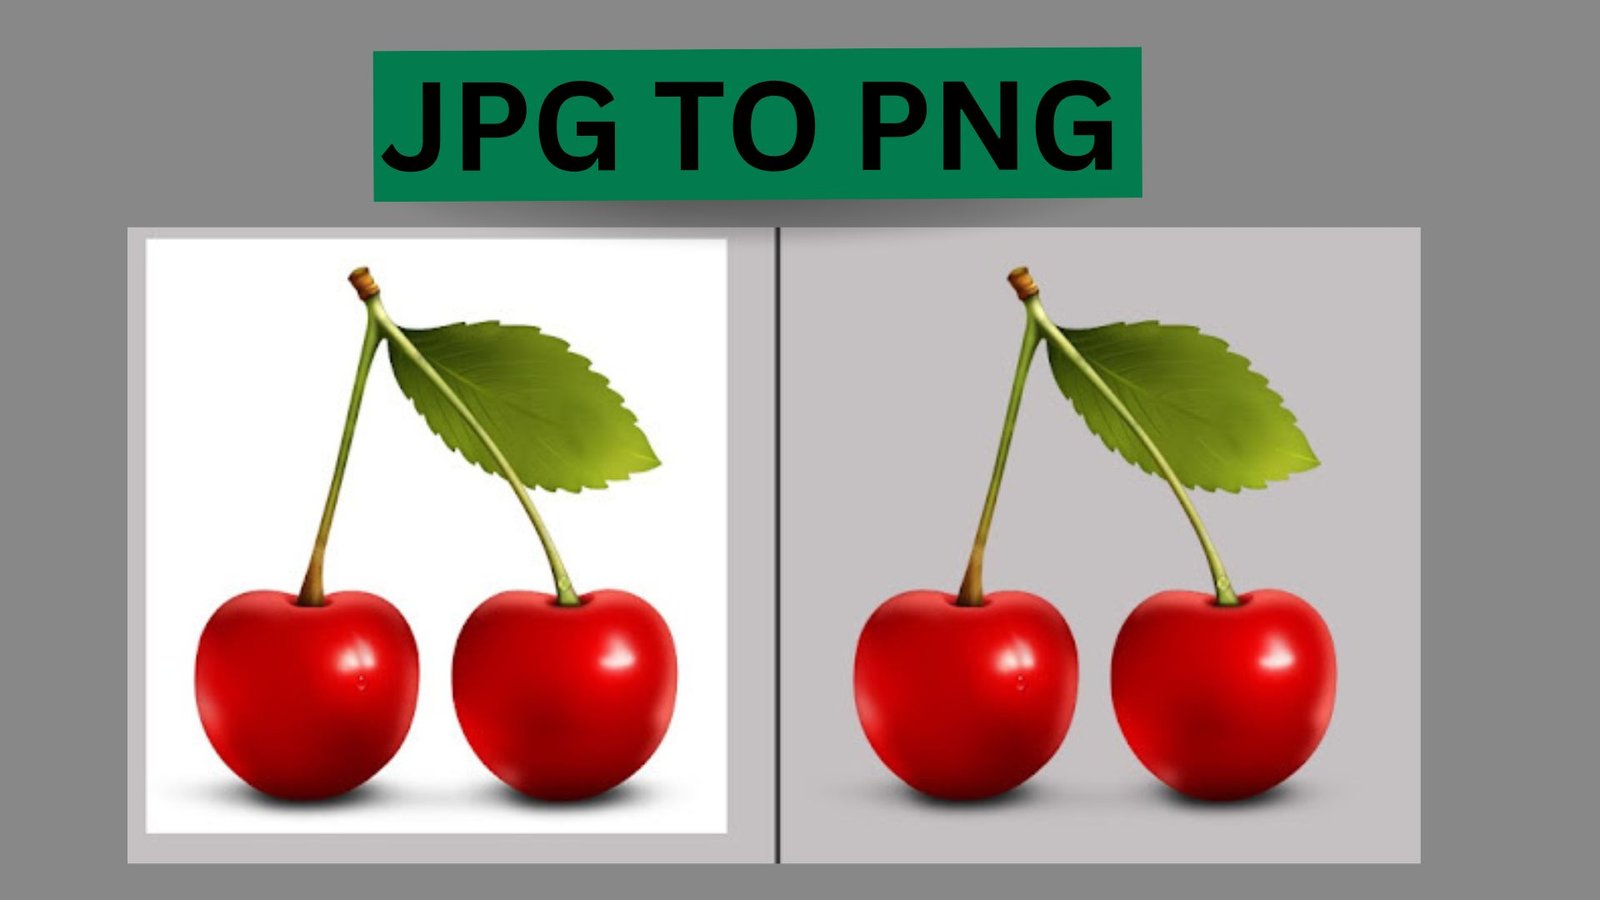 JPEG and PNG: The Basic Difference.